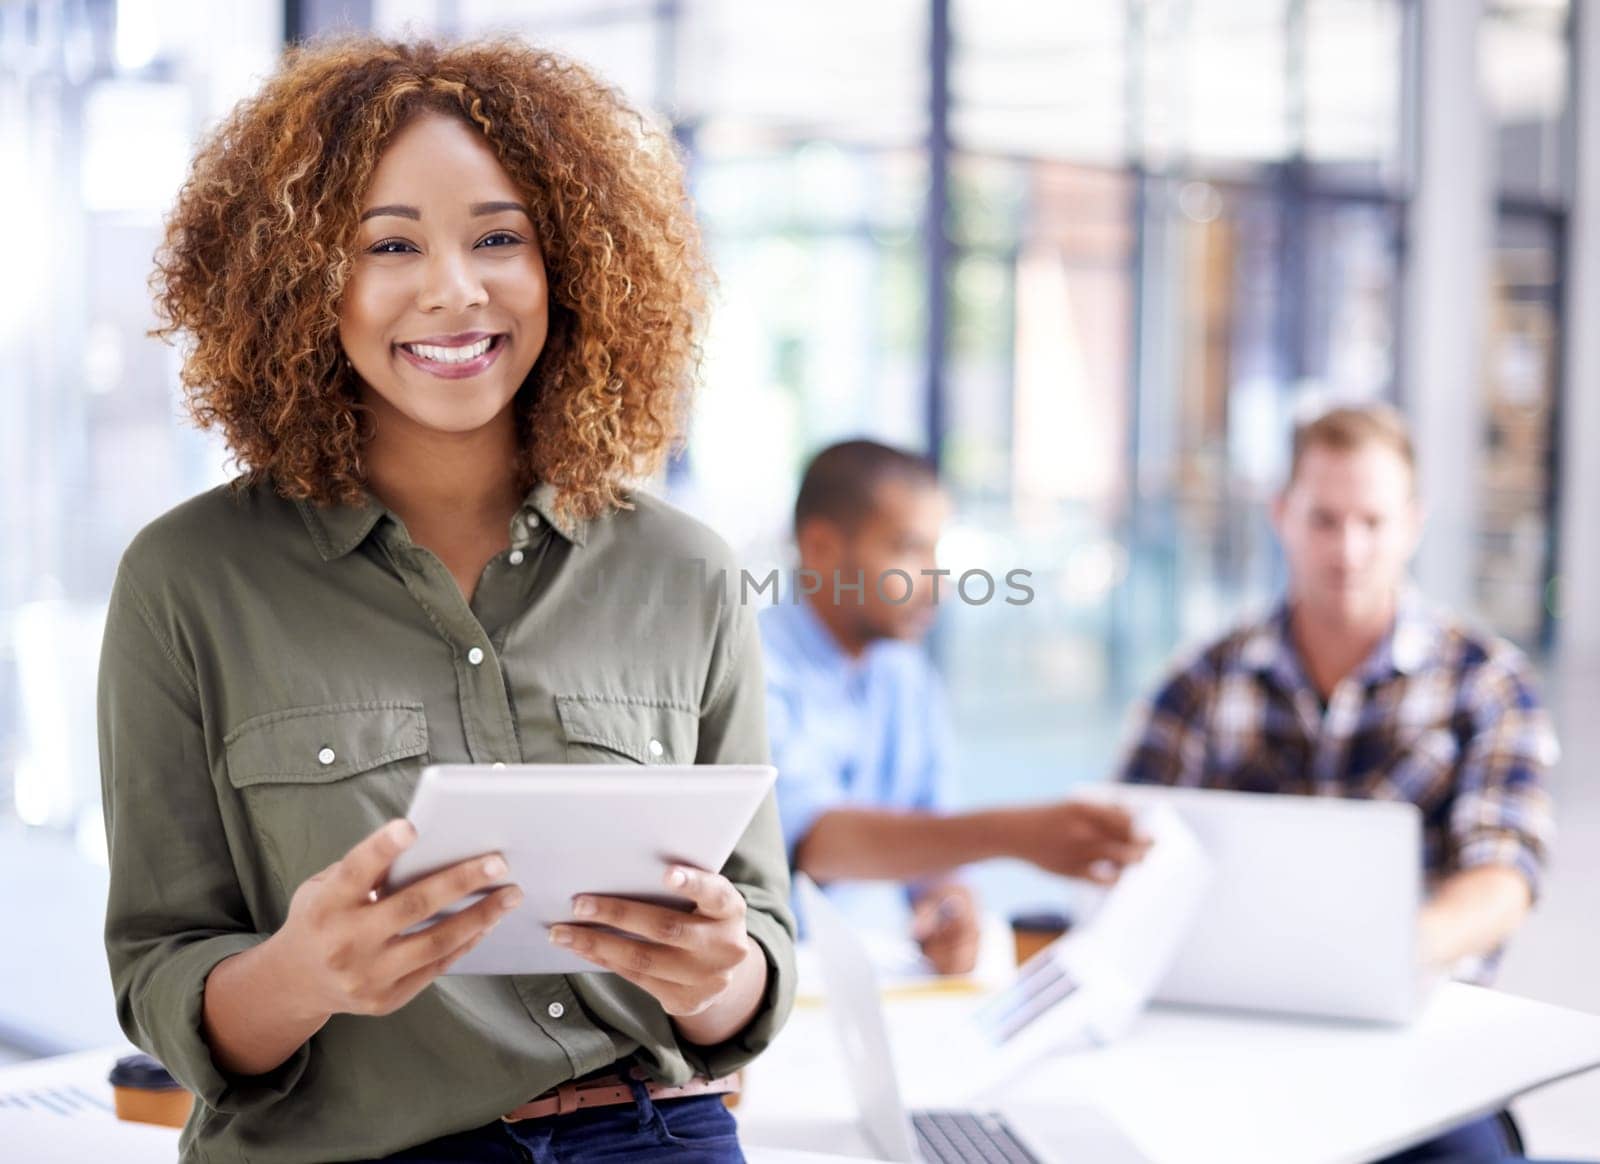 Woman, portrait and tablet in business office, web designer and creative career or online networking research. Internet, company and coworking workplace, reading and reviews for project or employee.